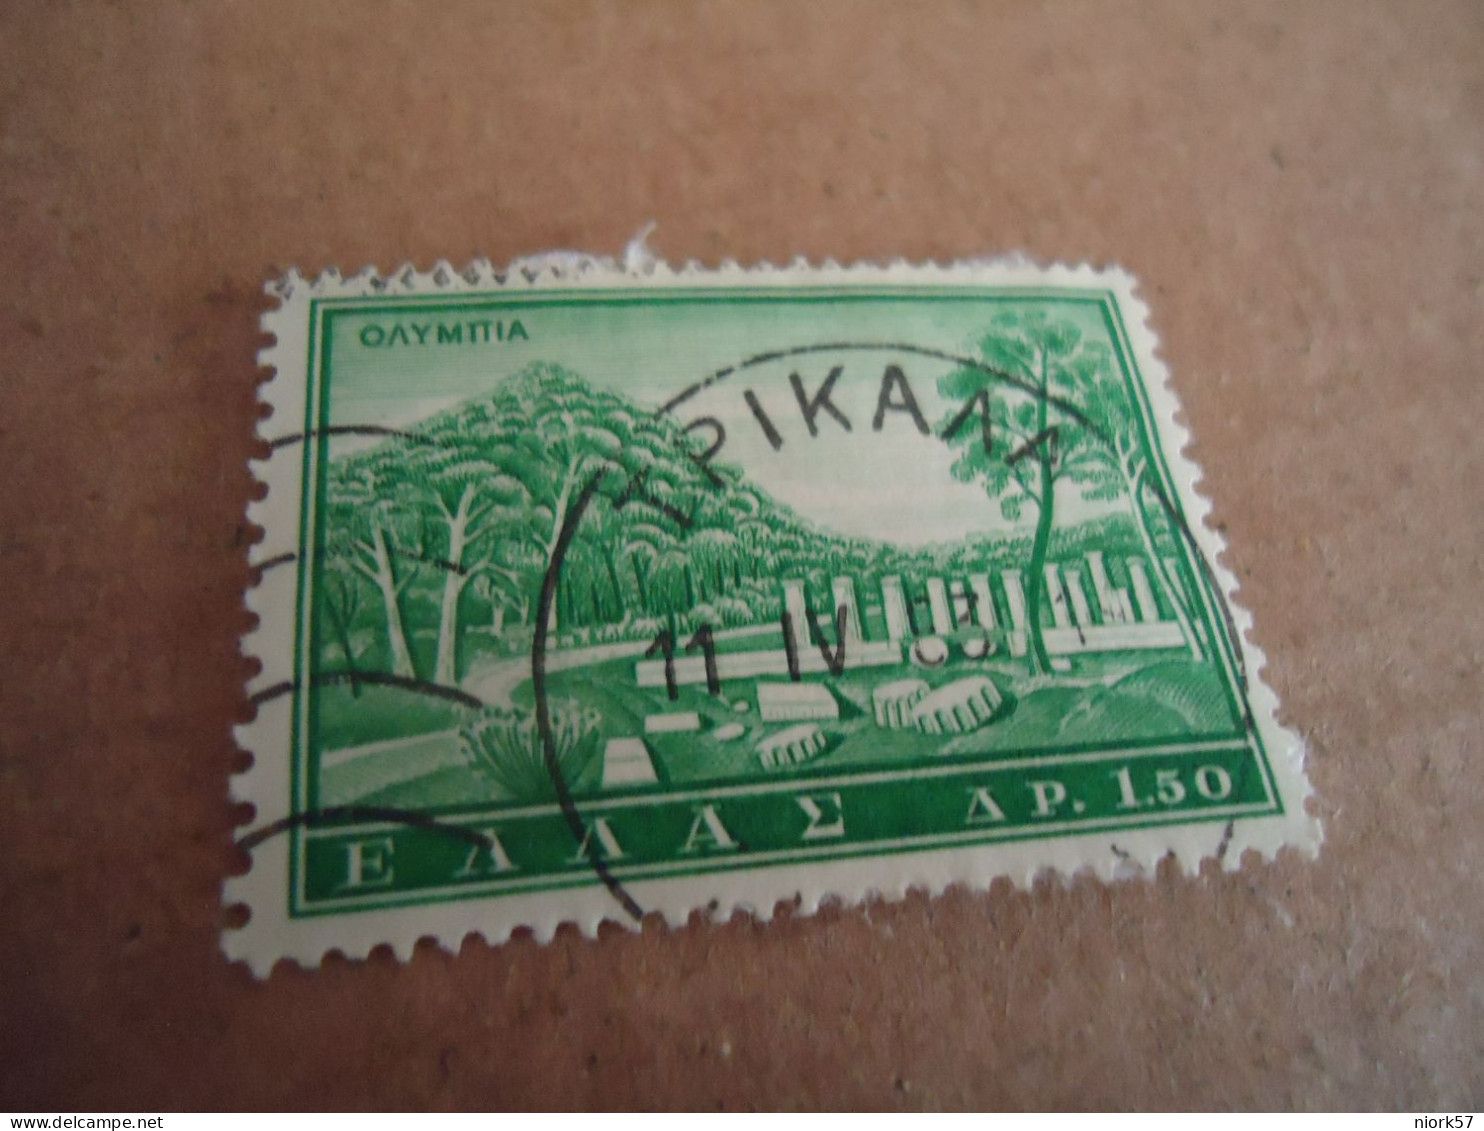 GREECE   POSTMARK ON STAMPS   ΤΡΙΚΚΑΛΑ 1963 - Affrancature Meccaniche Rosse (EMA)